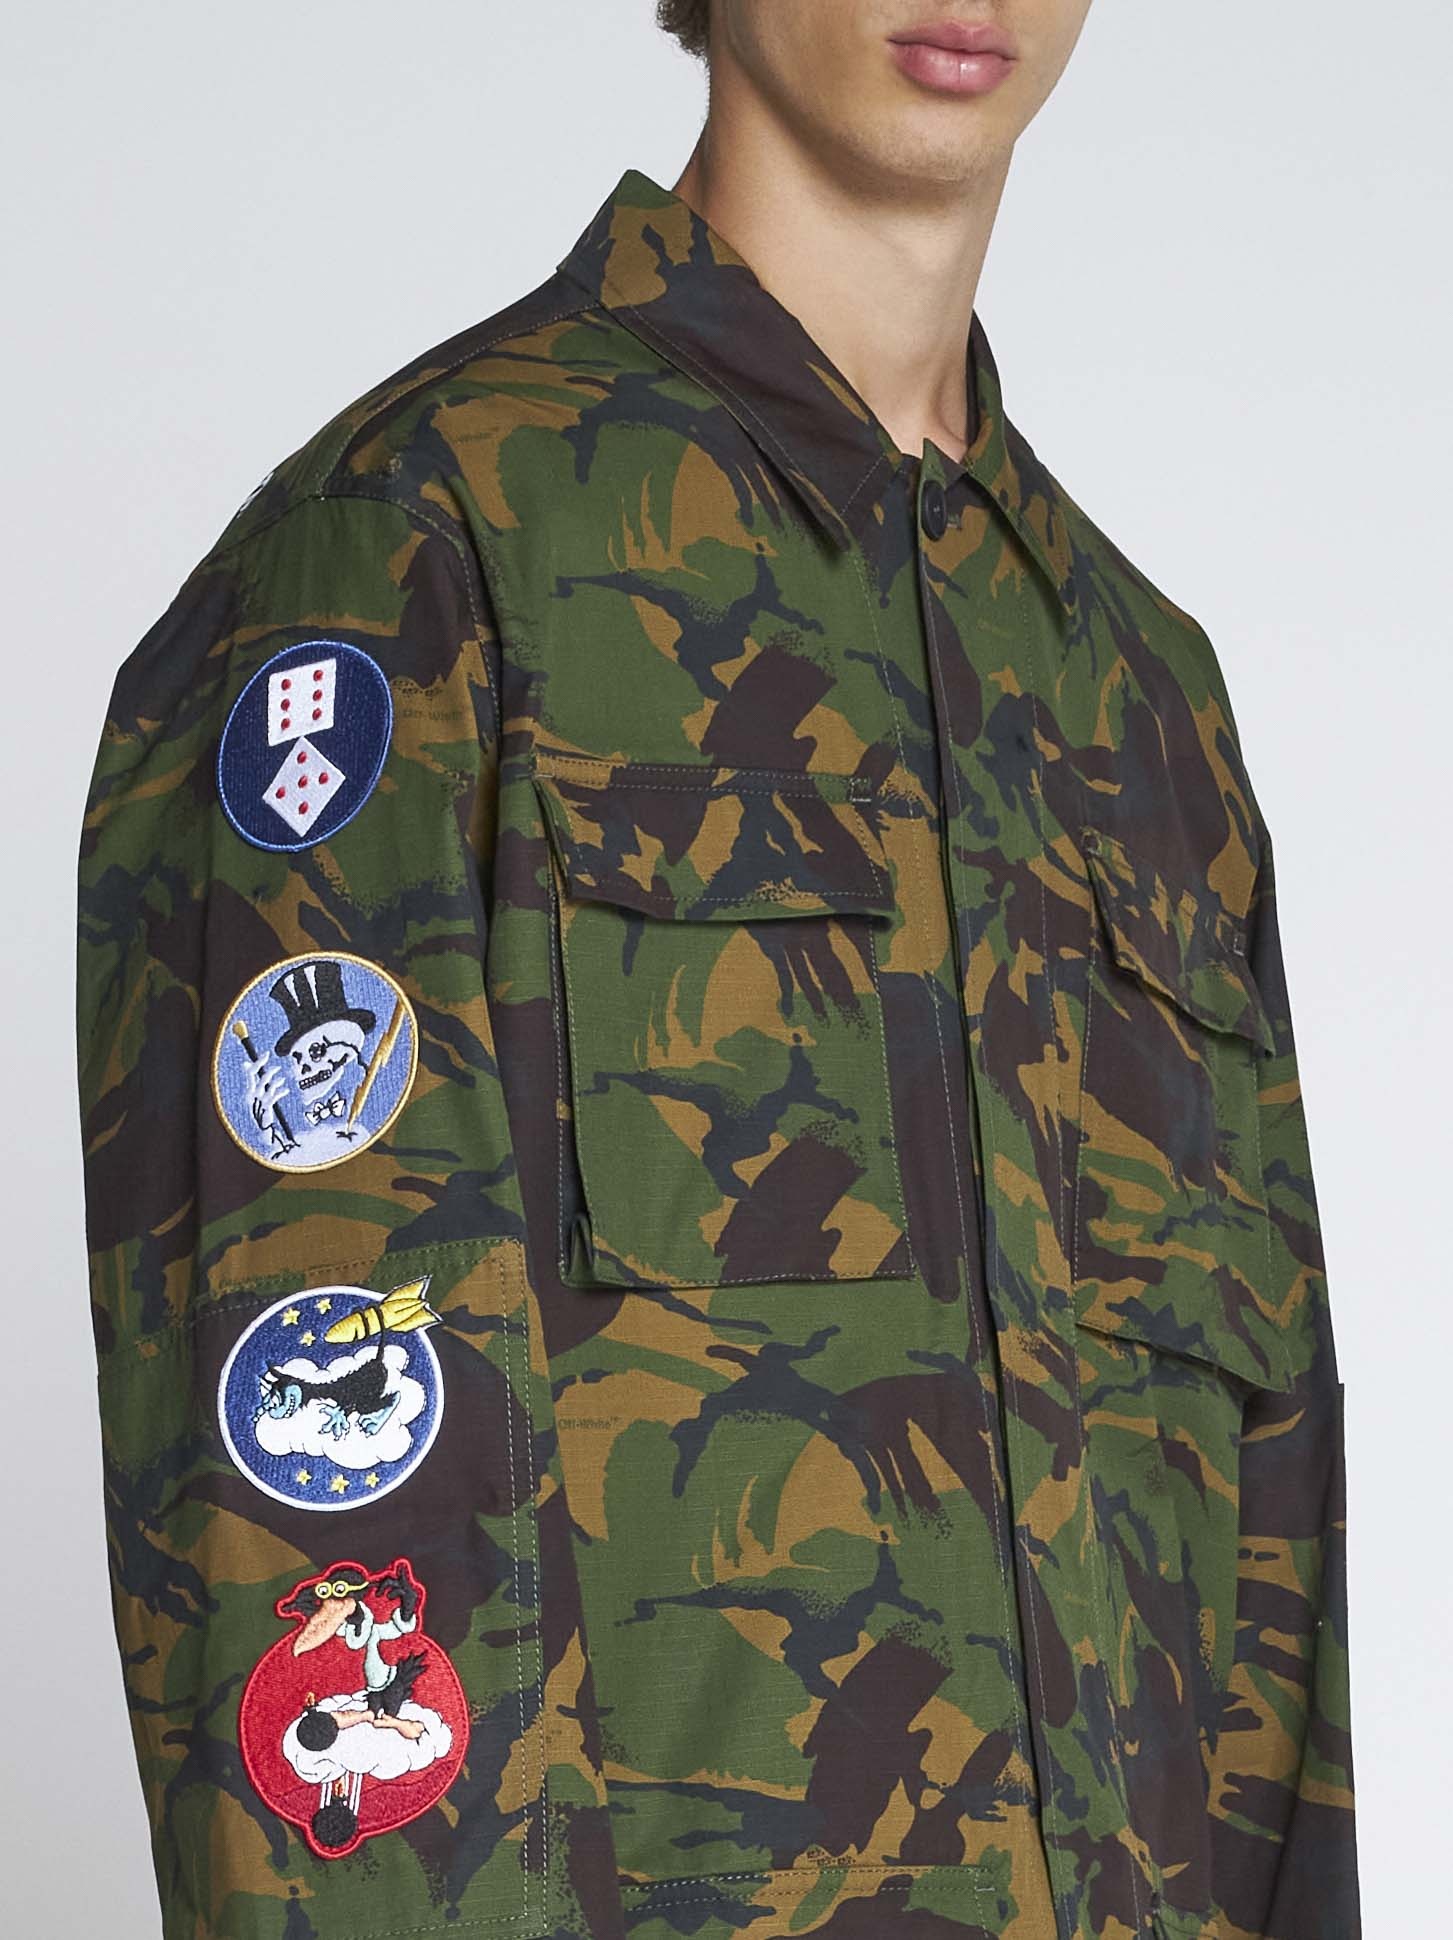 OFF-WHITE c/o Virgil Abloh Field Jacket (Camouflage)